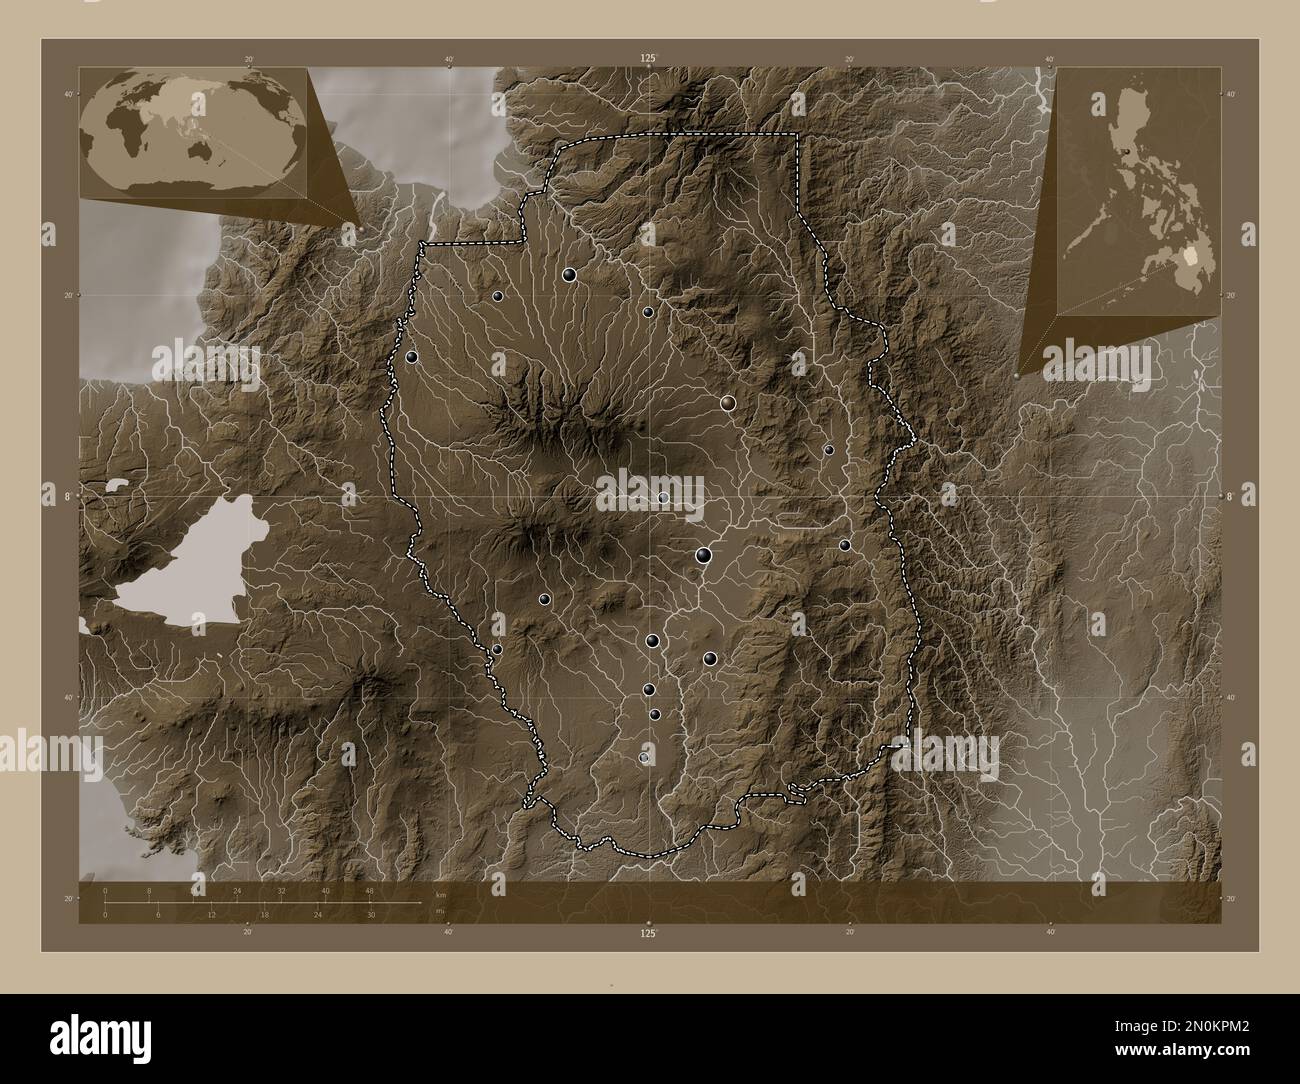 Bukidnon, province of Philippines. Elevation map colored in sepia tones with lakes and rivers. Locations of major cities of the region. Corner auxilia Stock Photo